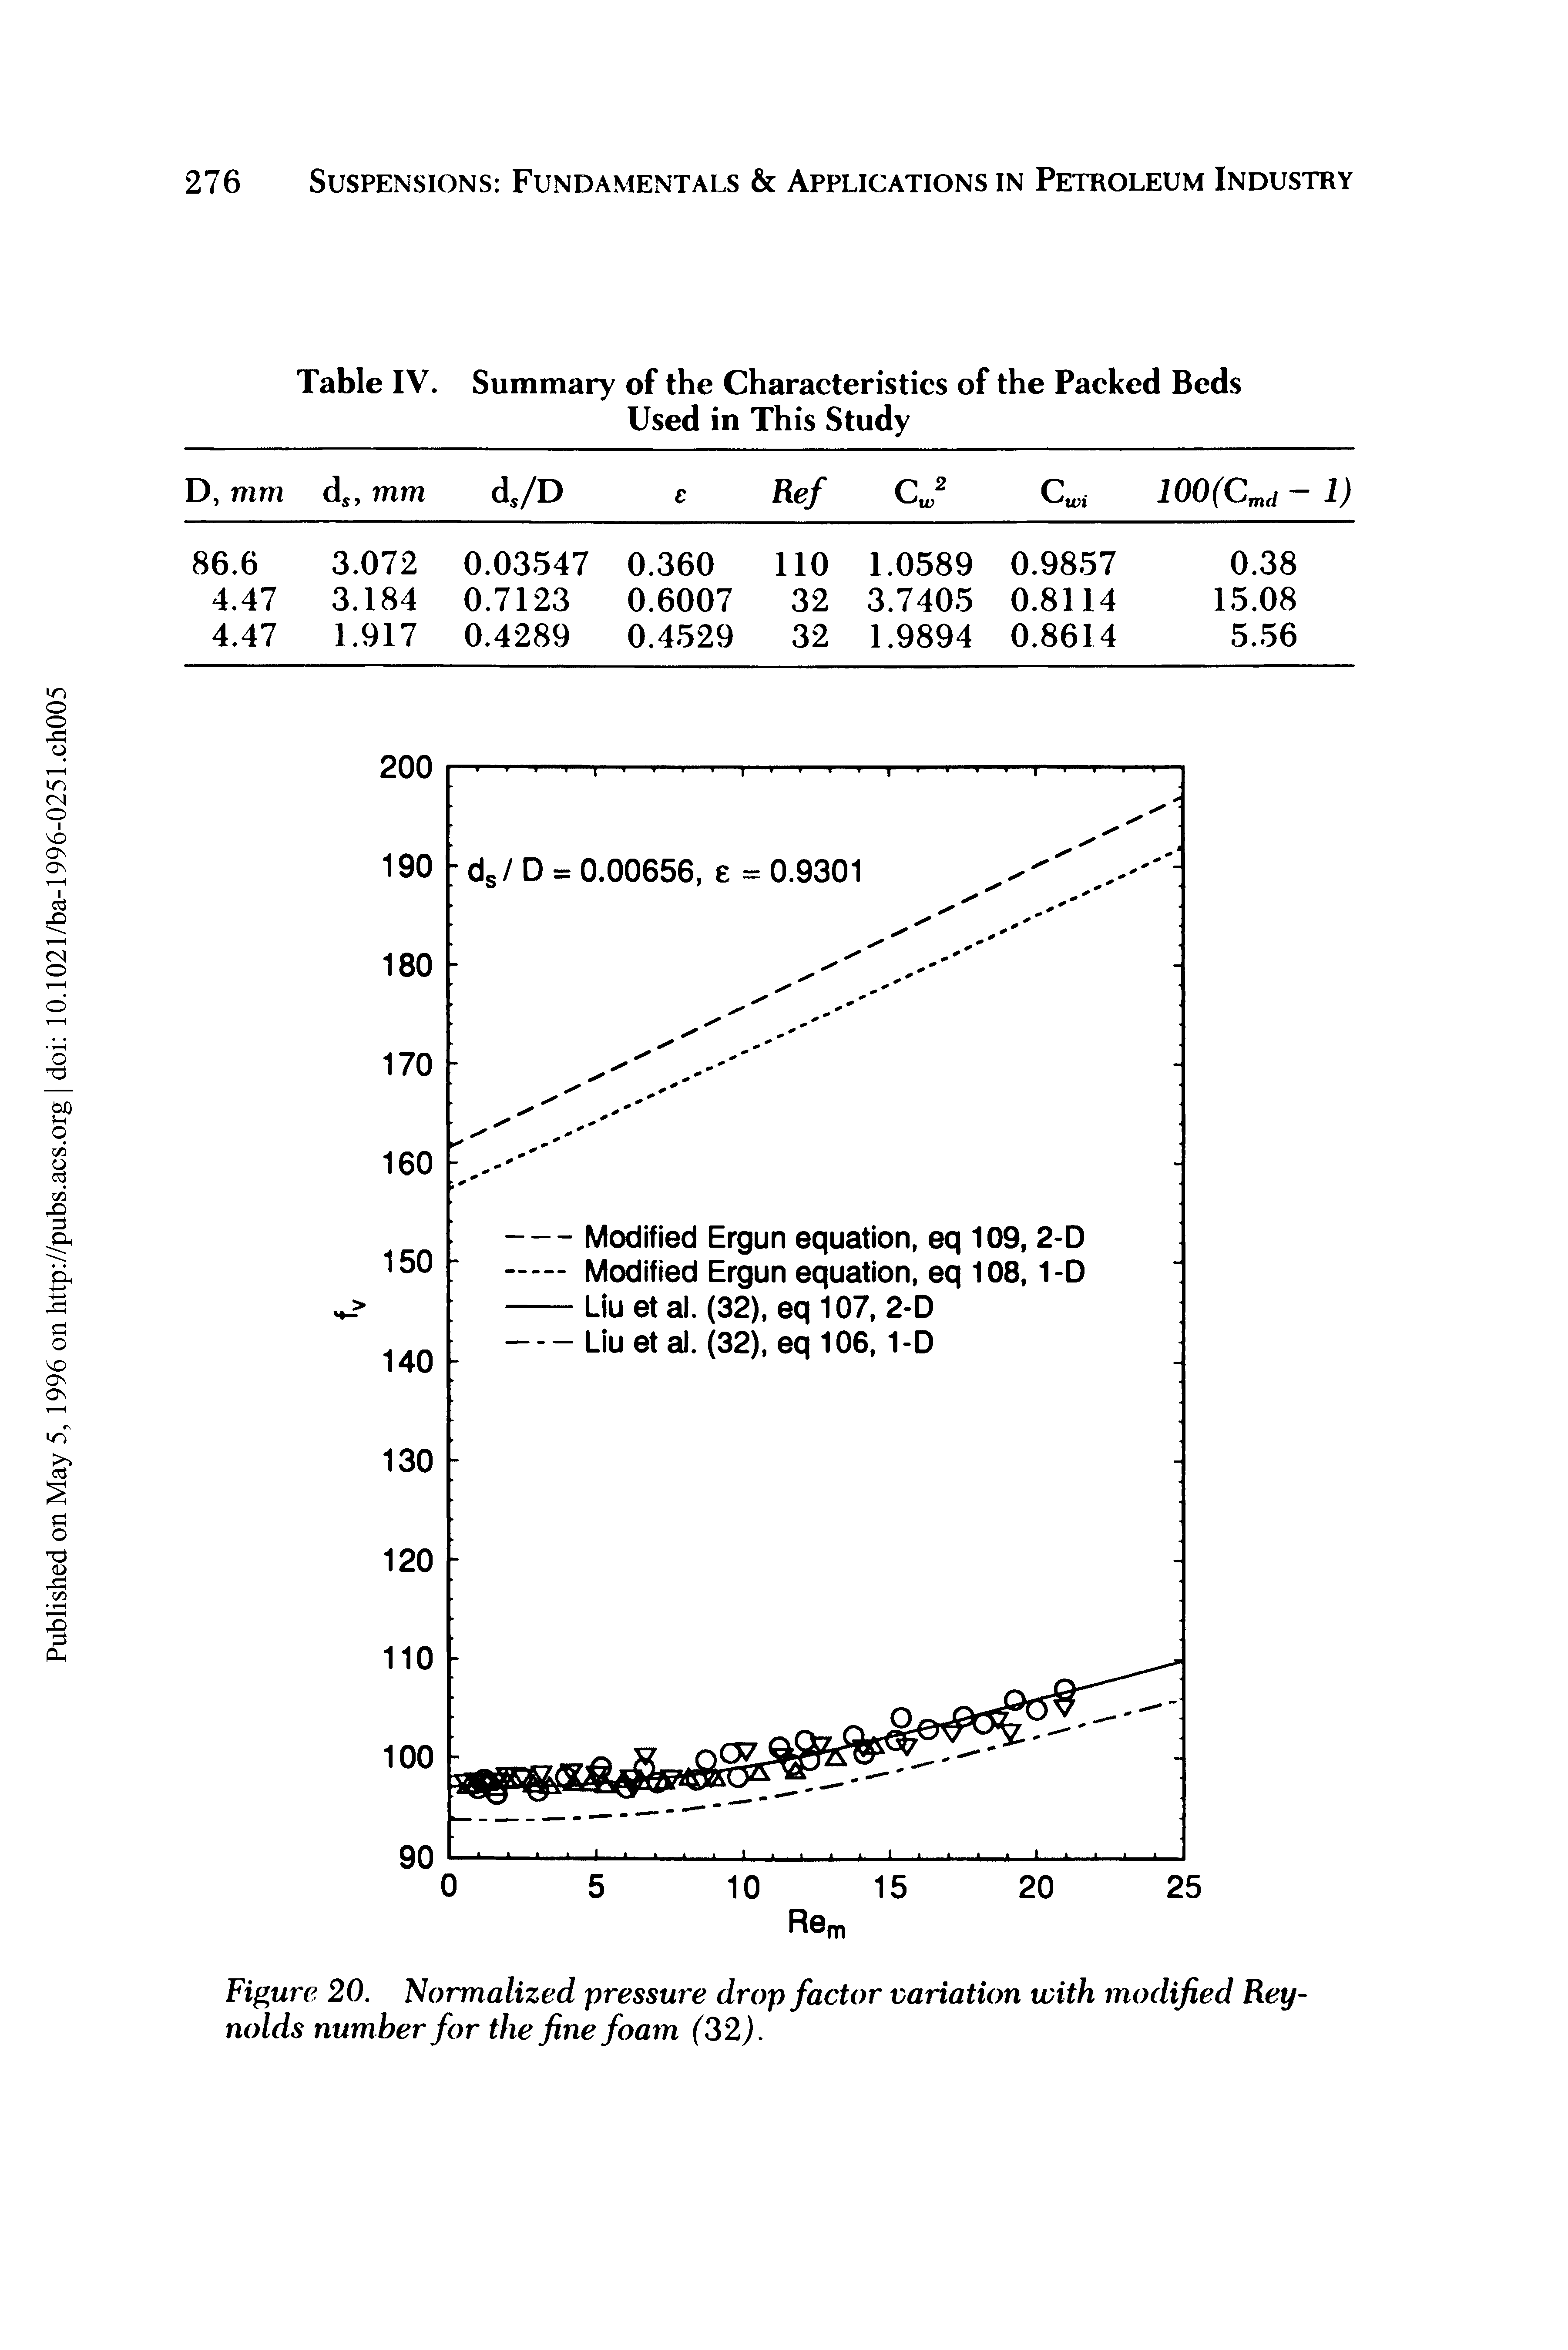 Figure 20. Normalized pressure drop factor variation with modified Reynolds number for the fine foam (32).